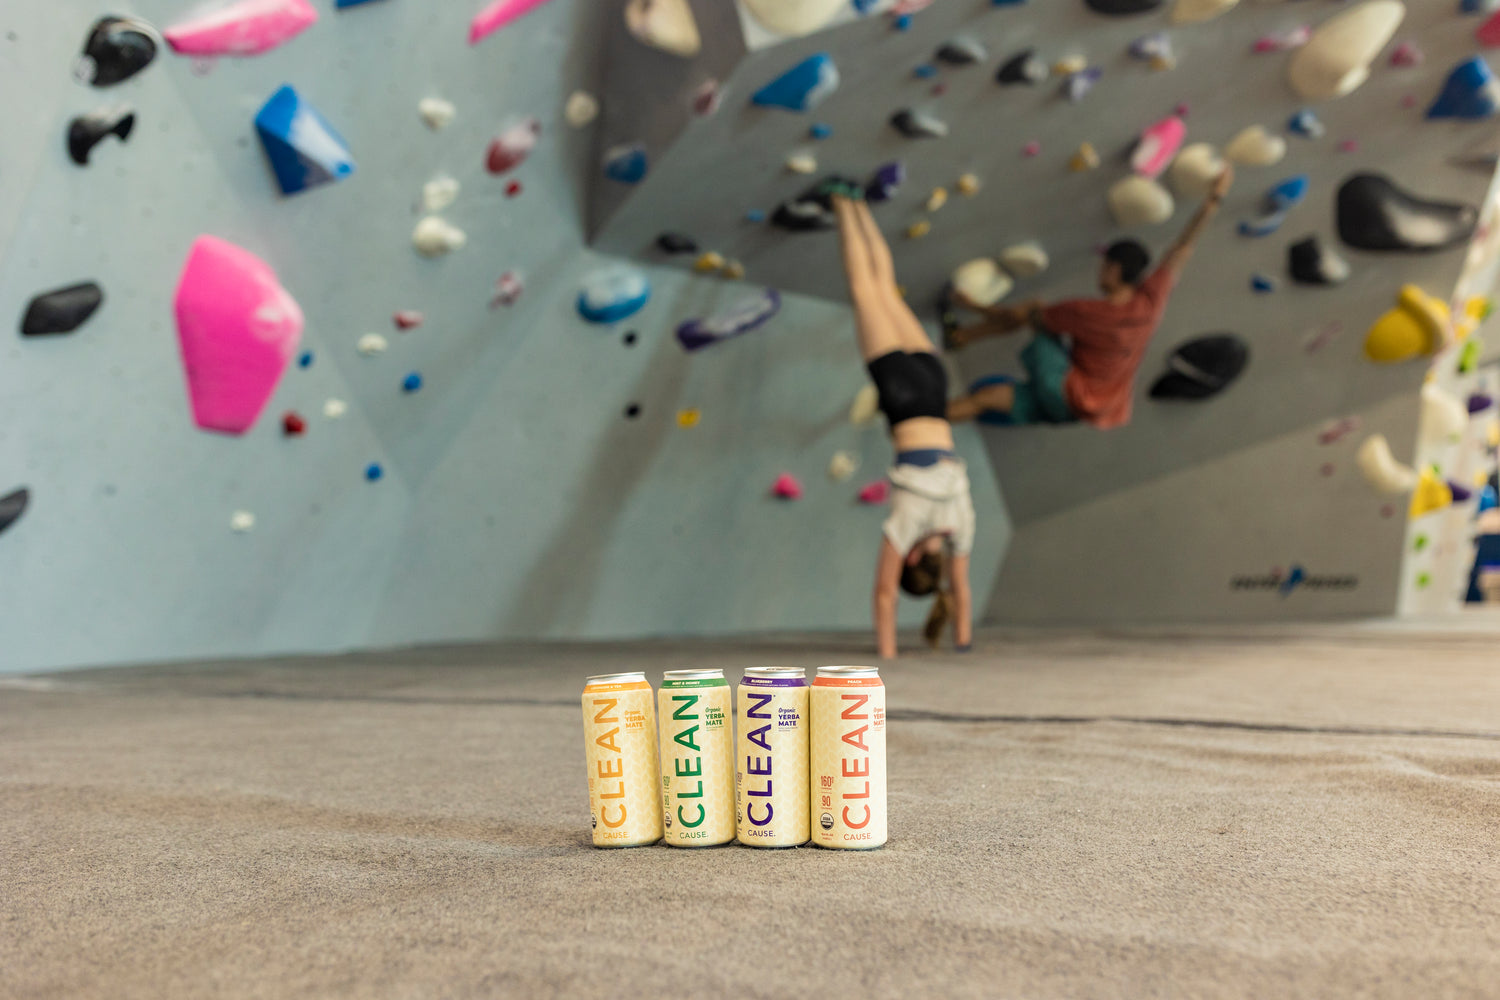 Set in a rocking climbing gym - the background is a rock climbing wall with colorful hand and foot holds. There is a man climbing and a woman doing a handstand in the background. In the foreground is a can of each flavor of CLEAN Cause Non-Carbonated Organic Yerba Mate